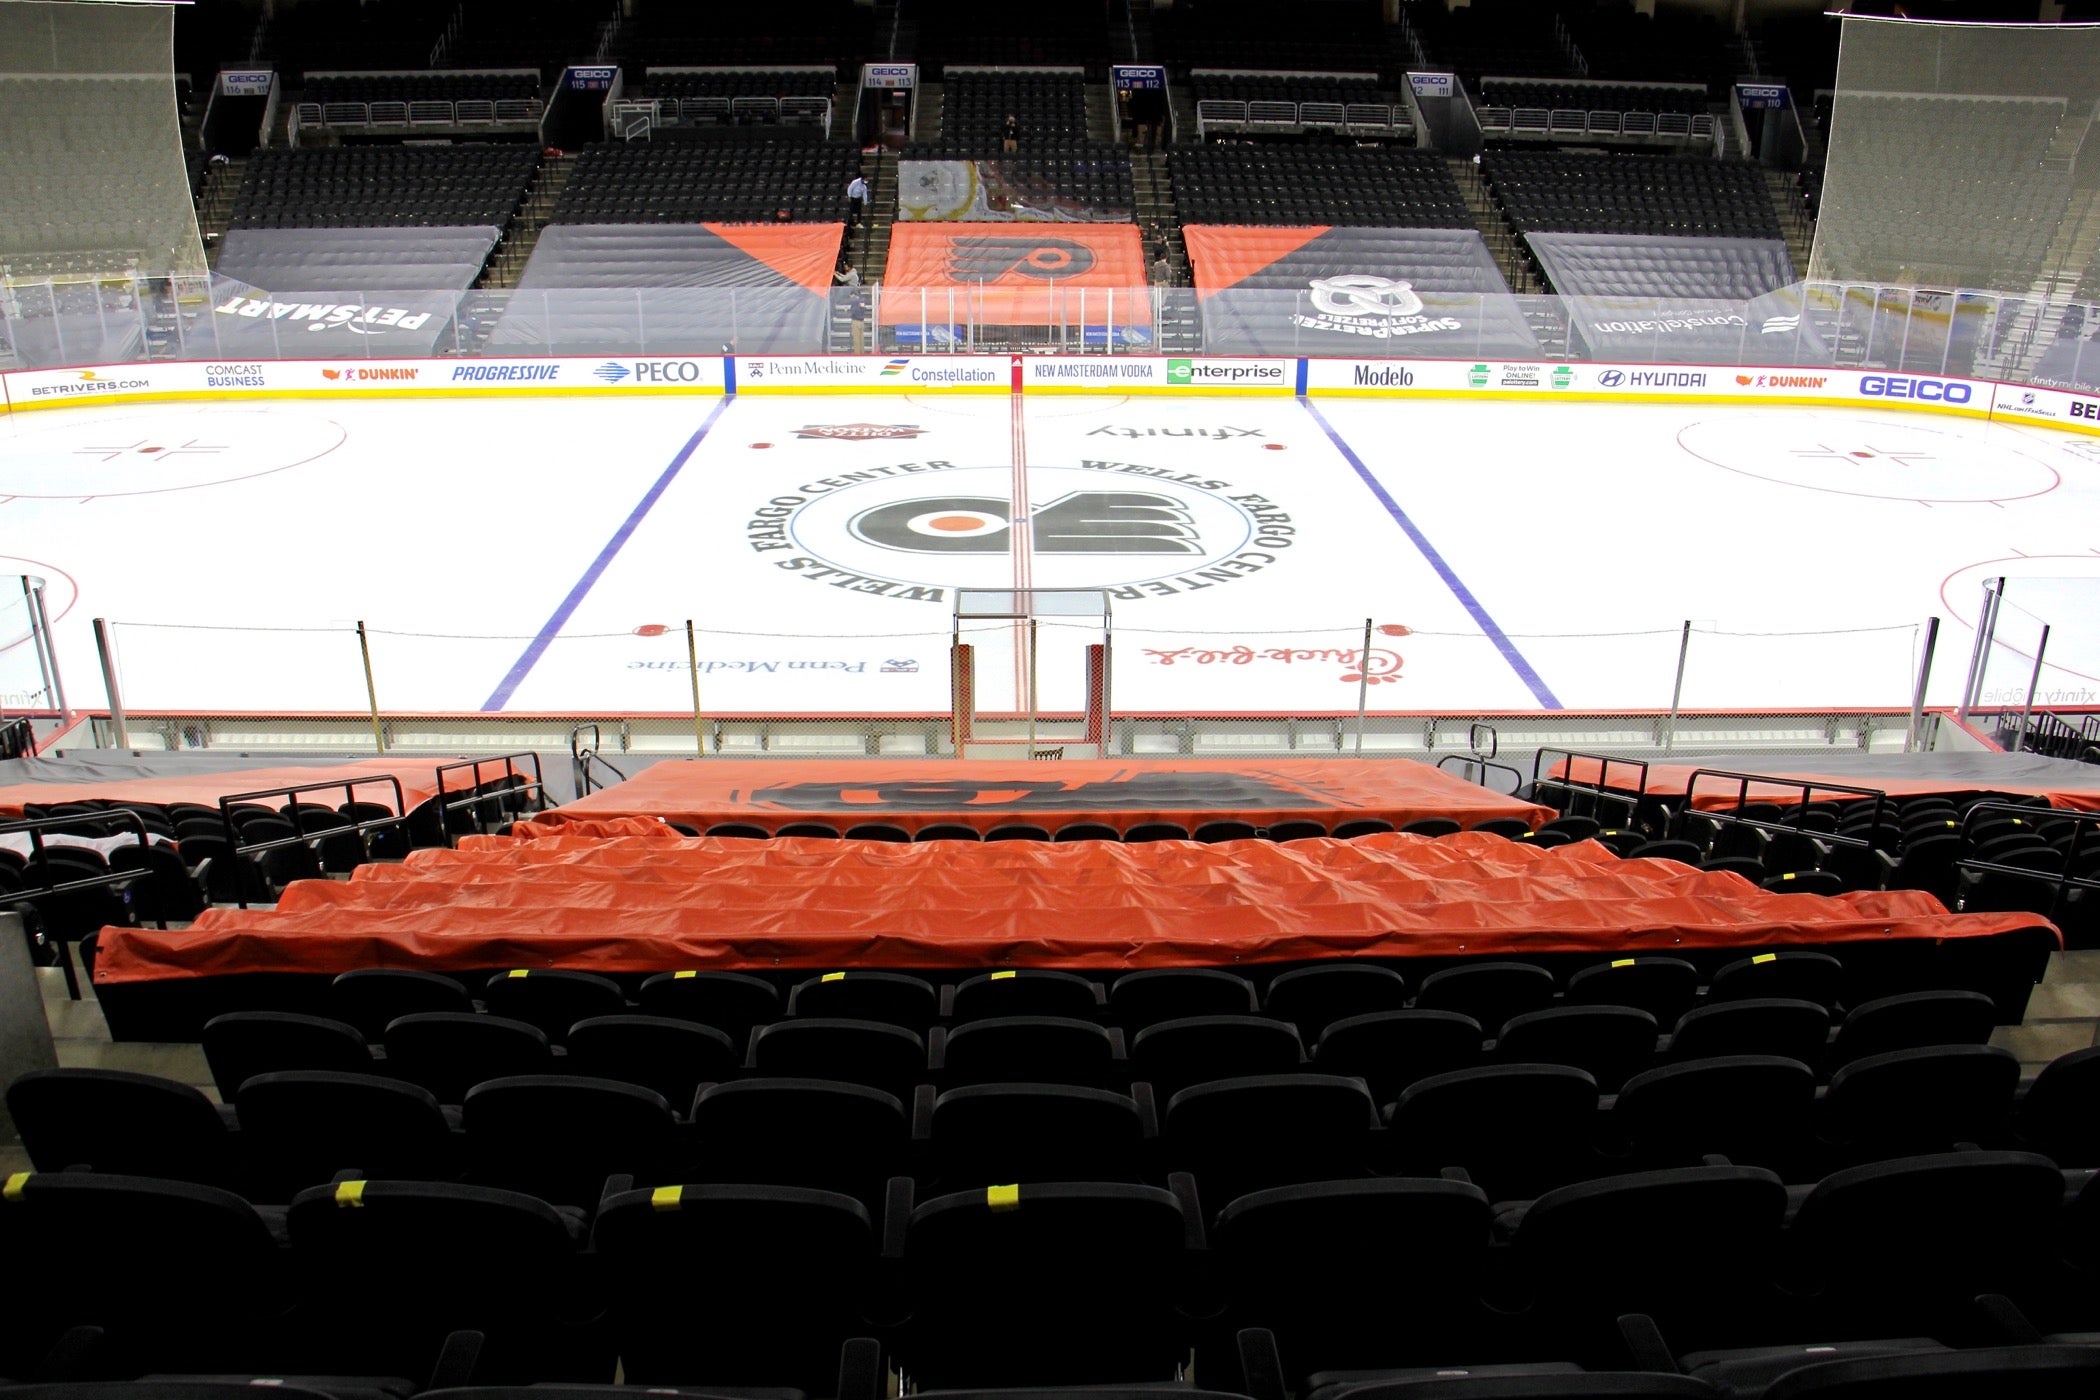 Flyers fans can return to Wells Fargo Center for next home game